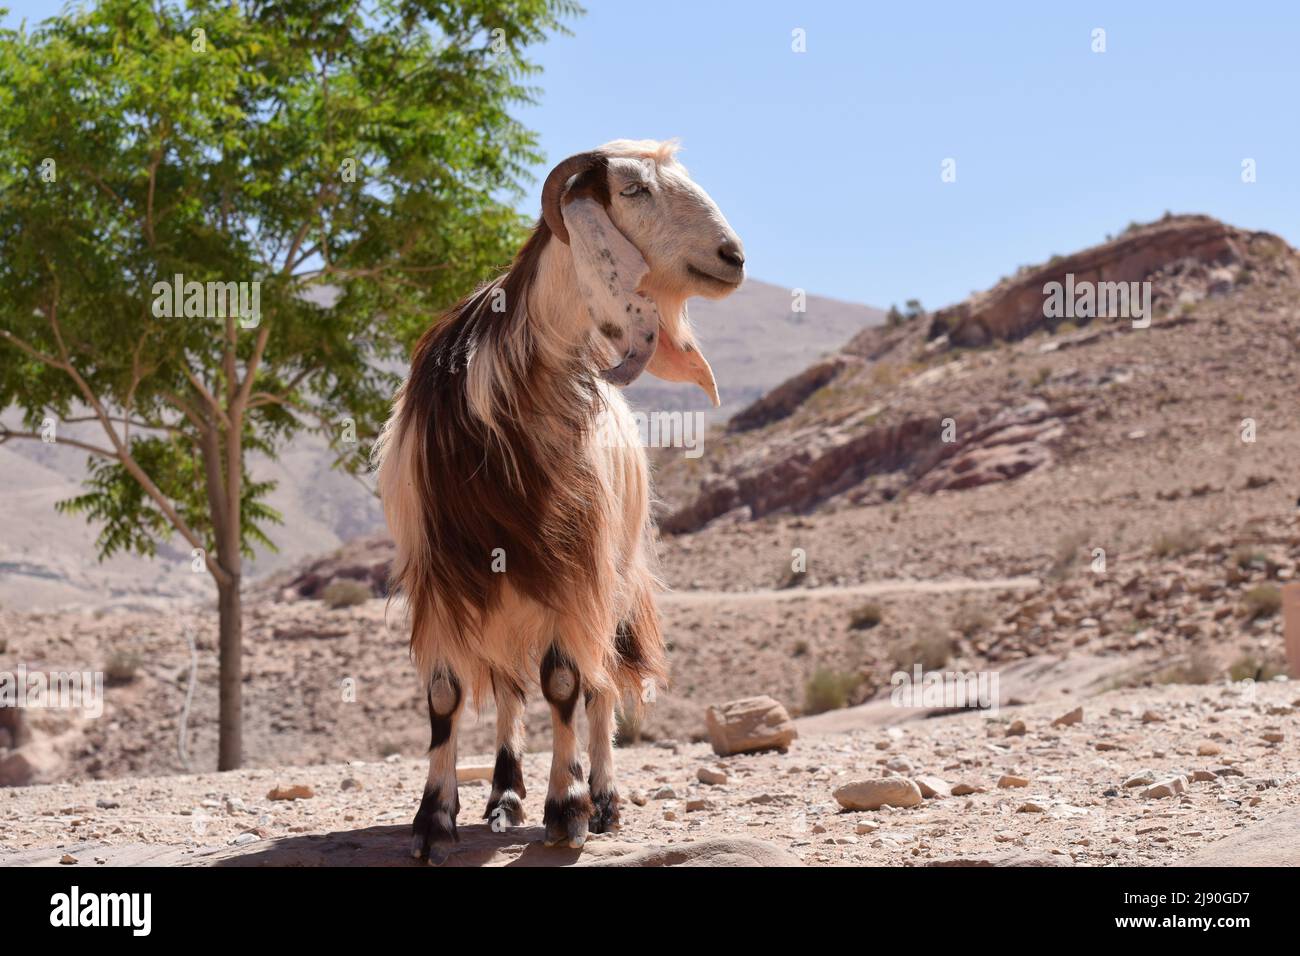 A long haired brown and white goat standing on a rock in the Middle East Stock Photo